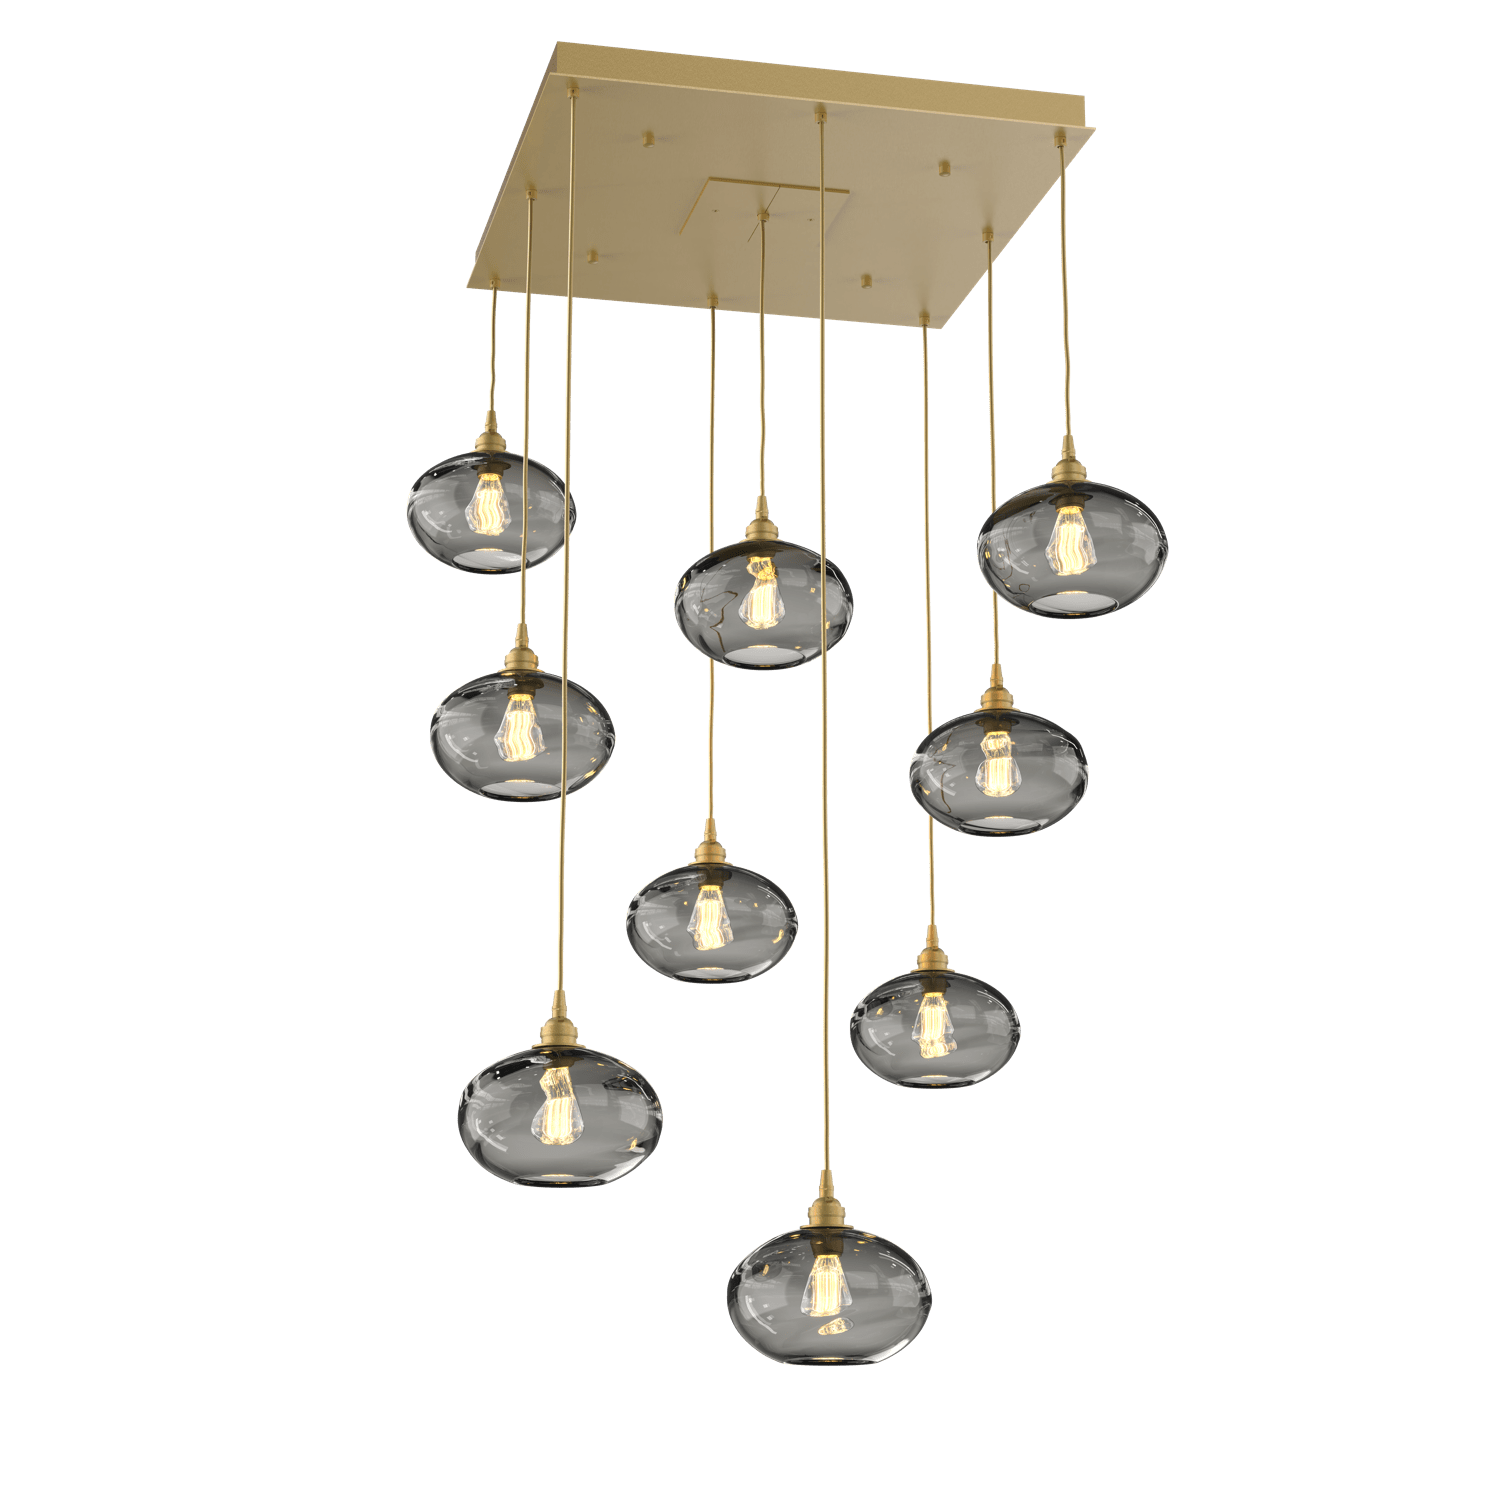 CHB0036-09-GB-OS-Hammerton-Studio-Optic-Blown-Glass-Coppa-9-light-square-pendant-chandelier-with-gilded-brass-finish-and-optic-smoke-blown-glass-shades-and-incandescent-lamping